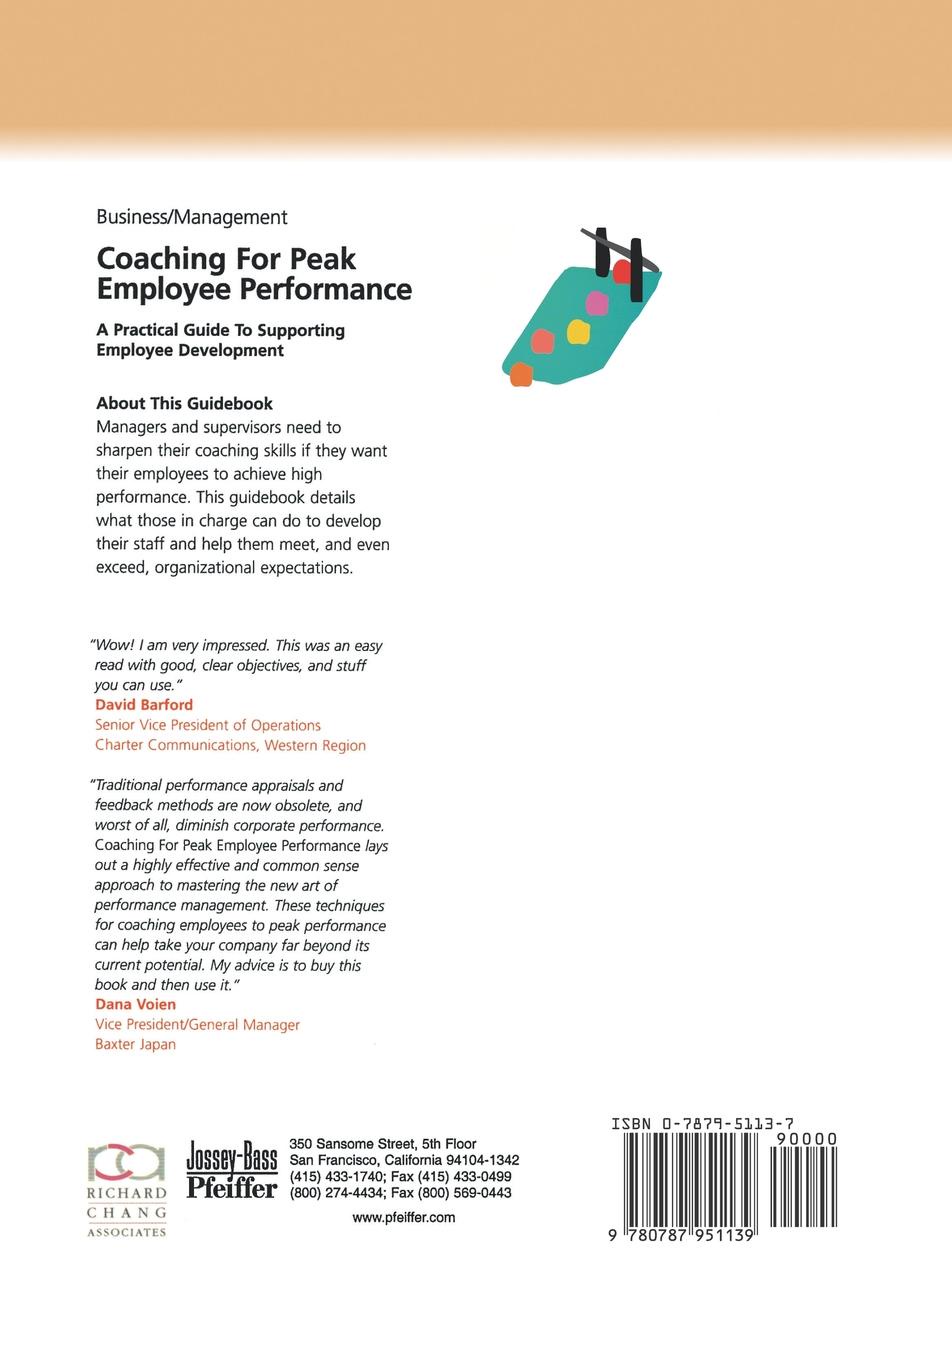 Coaching for Peak Employee Performance. A Practical Guide to Supporting Employee Development